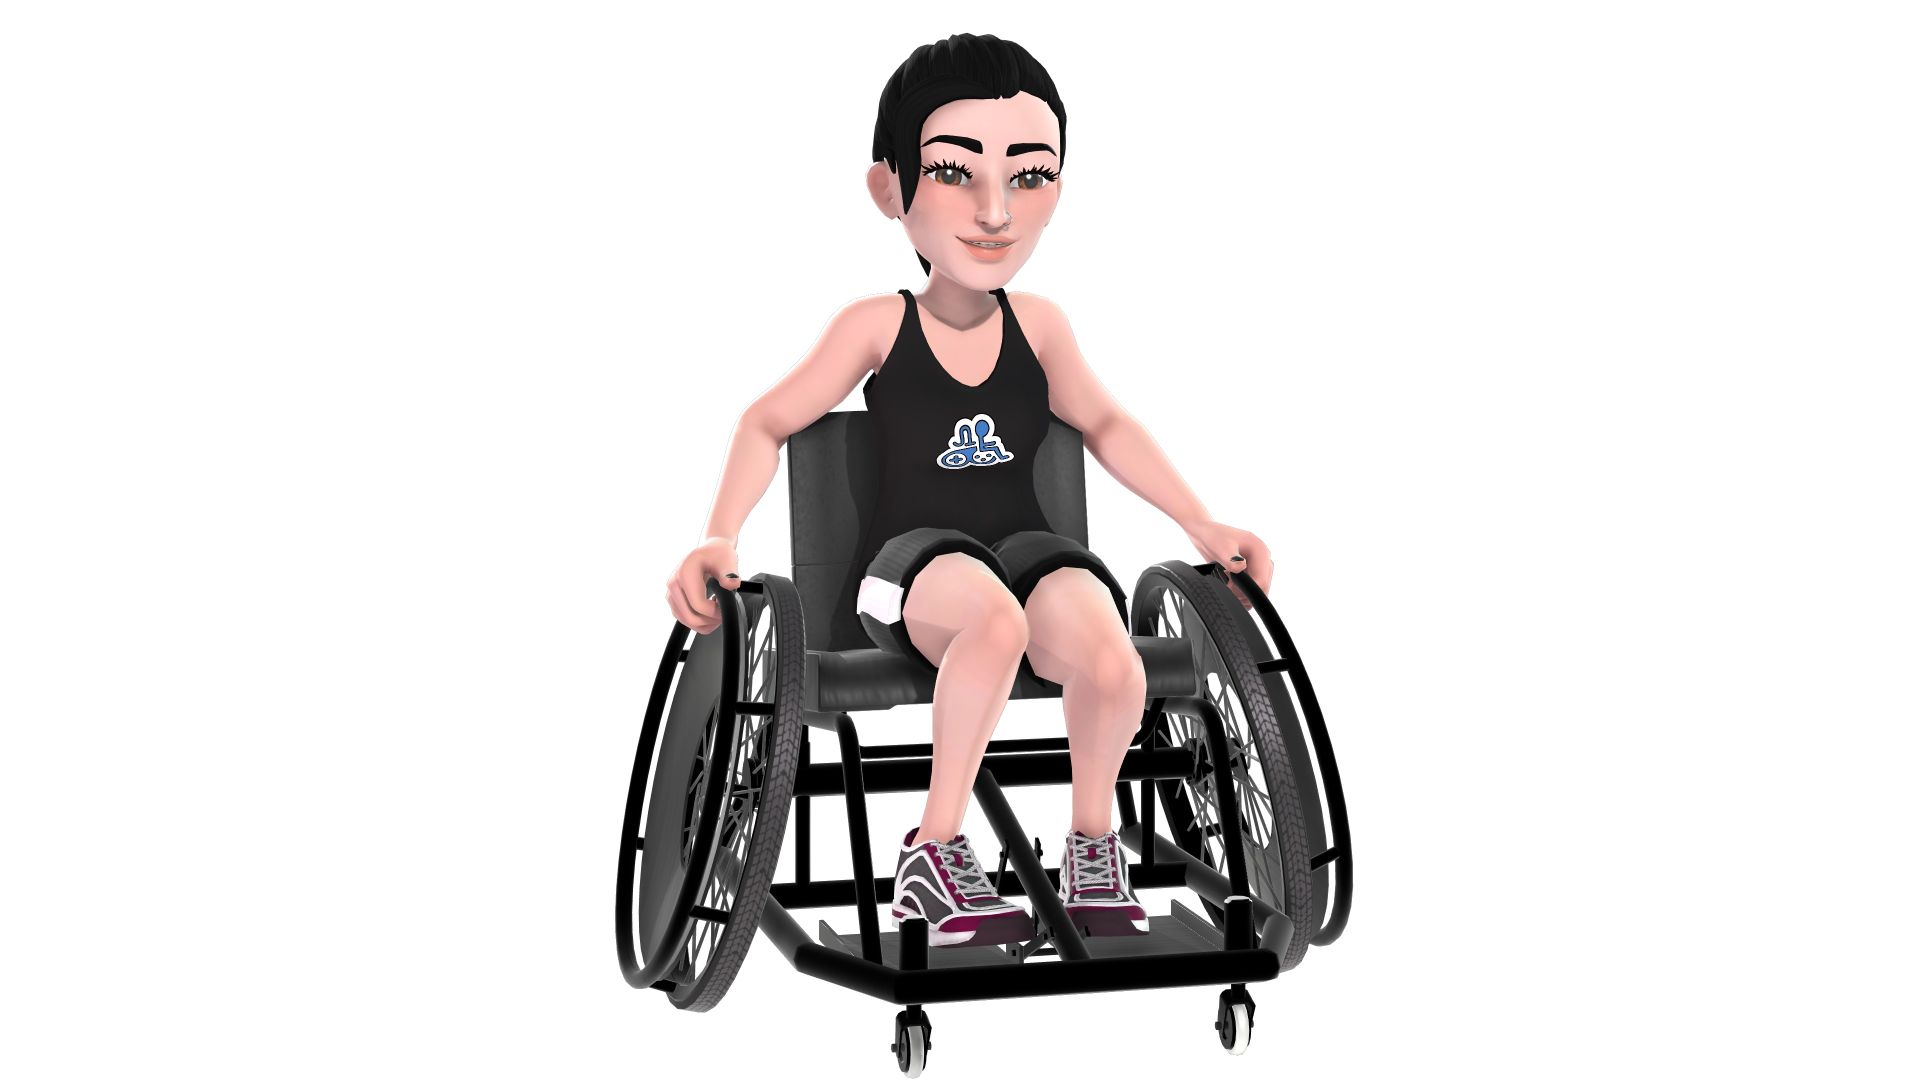 An Xbox avatar white woman seated in a wheelchair wearing a black tank top with the Disability Pride sphere logo and black shorts.